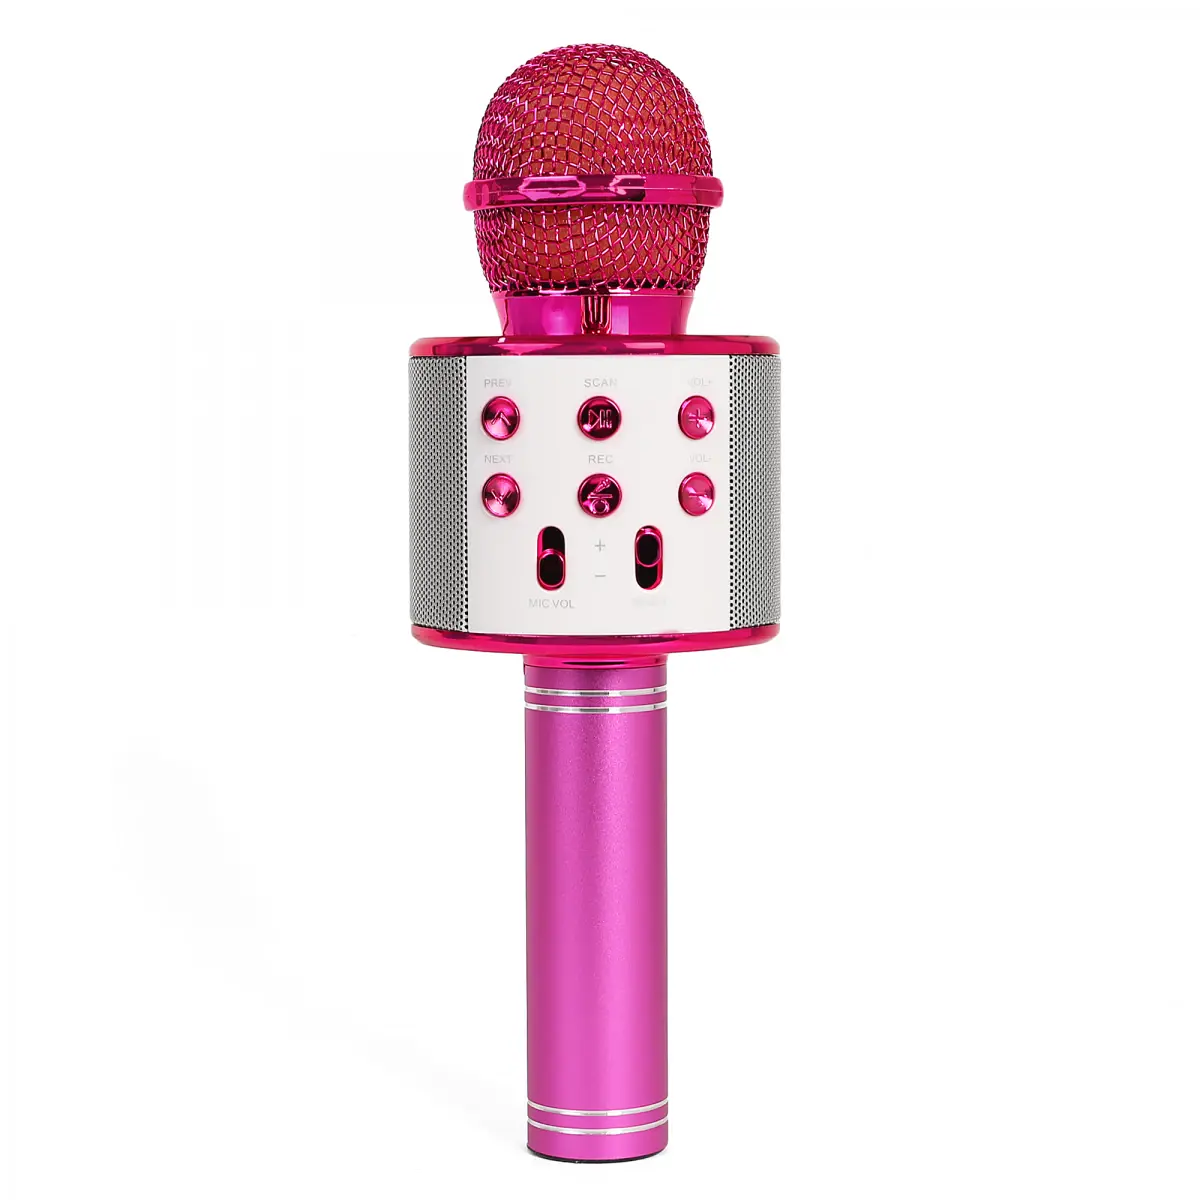 Hamleys Party Mic for Kids, Pink, 5Y+